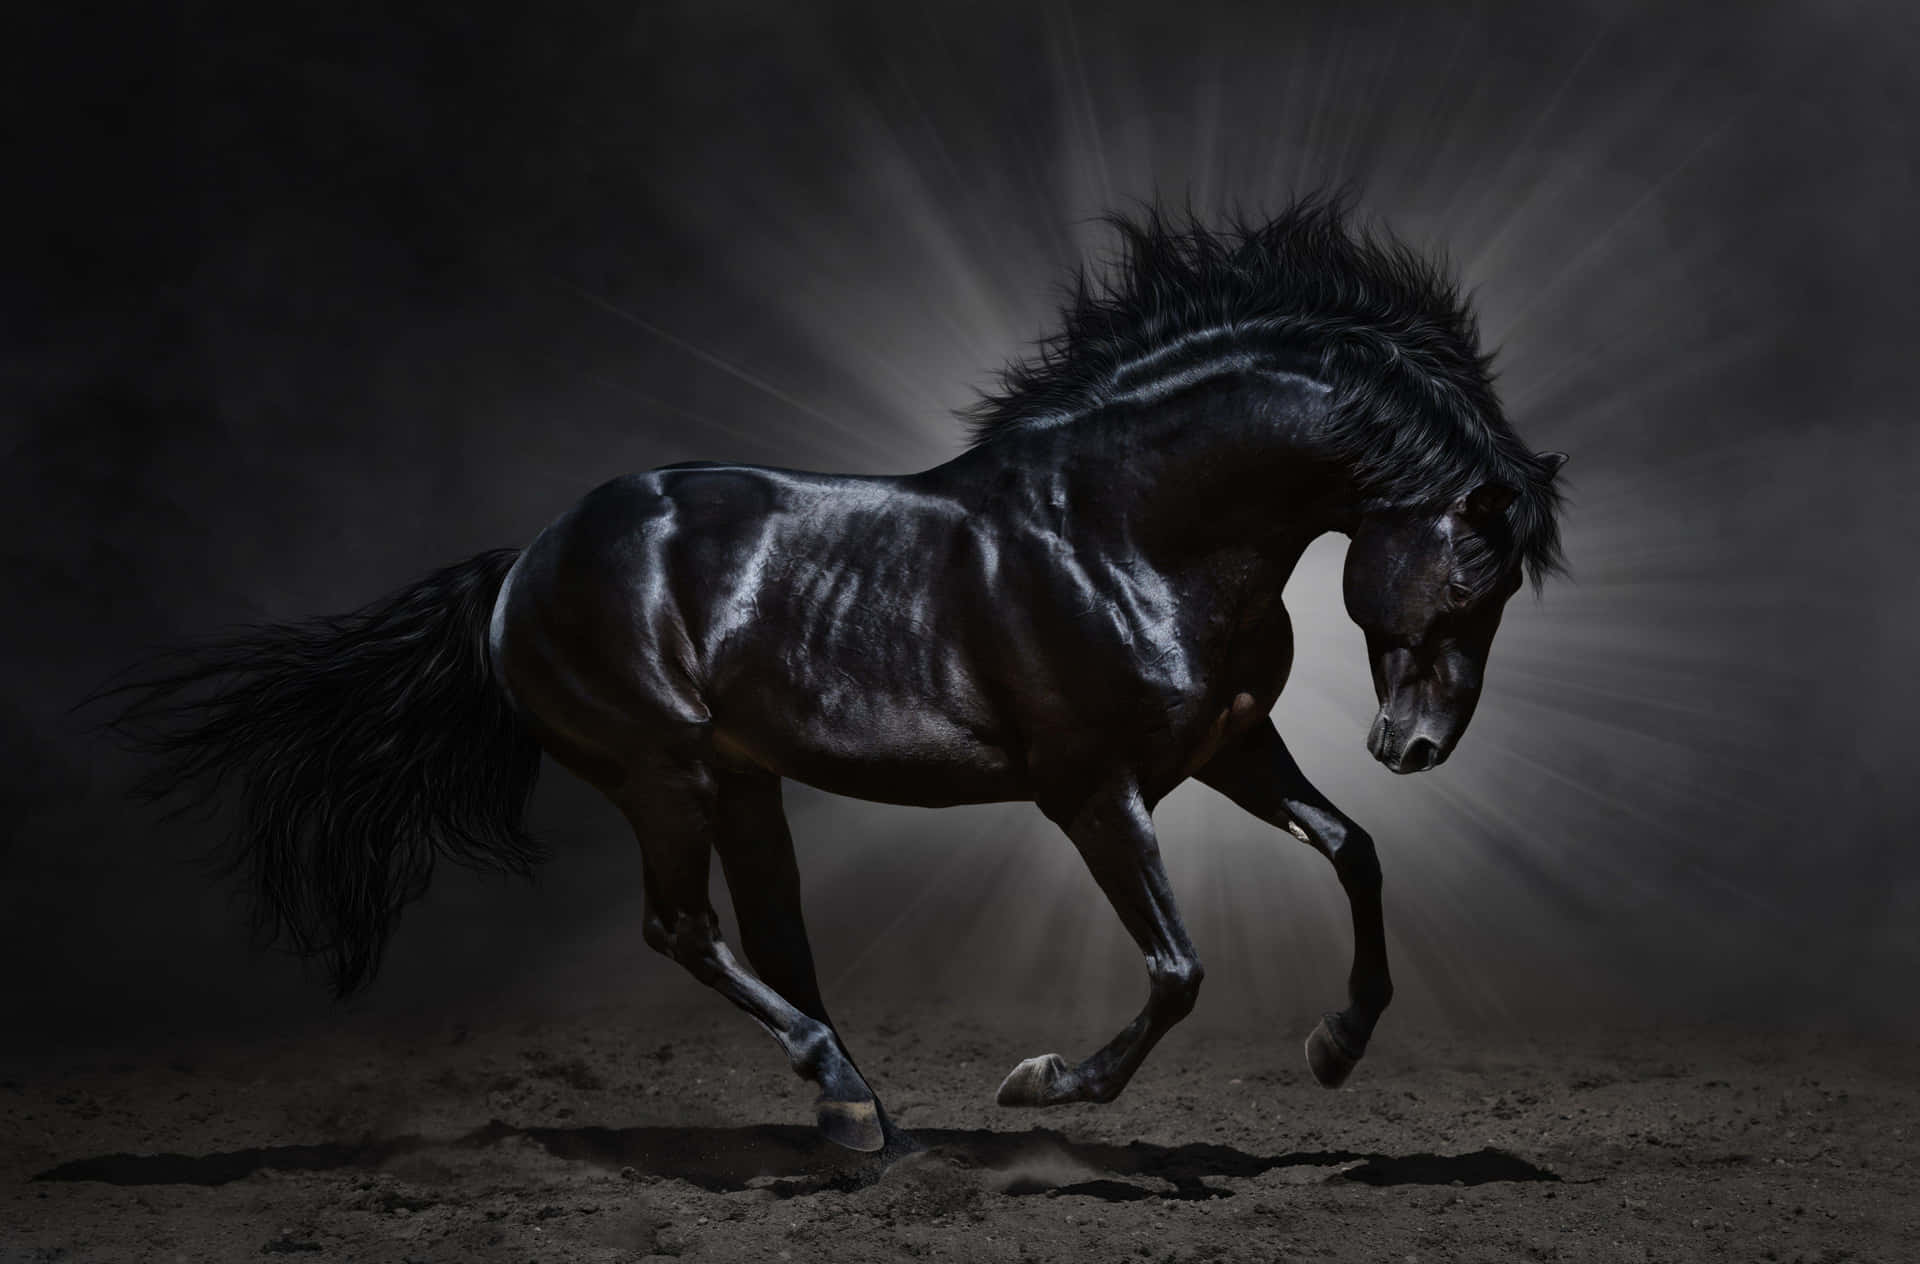 Majestic Black Horse Galloping in the Field